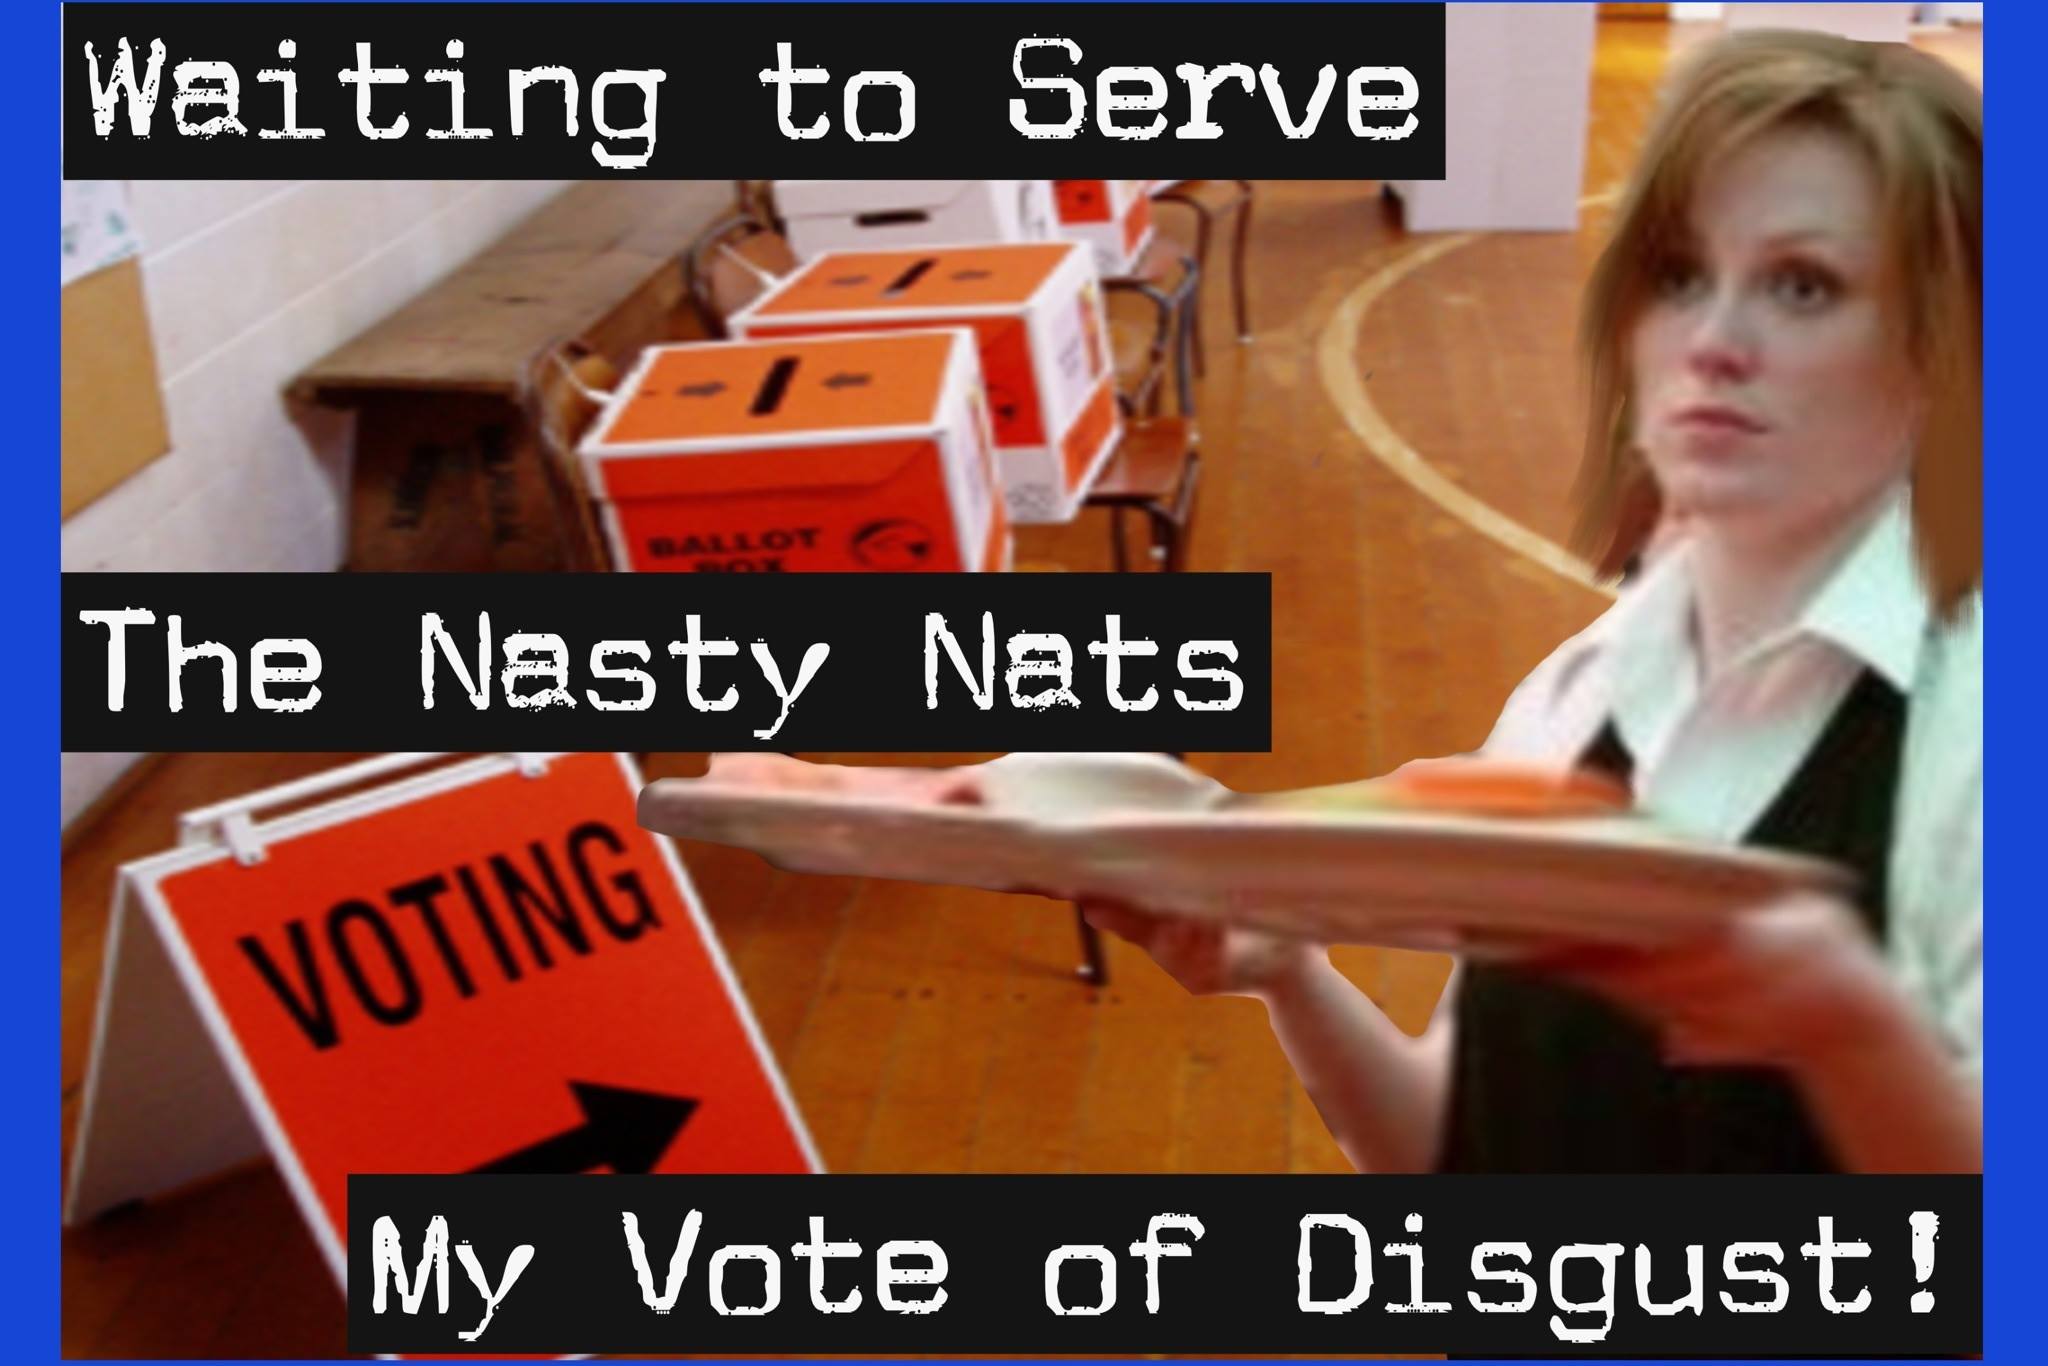  - waiting-to-serve-the-nats-a-vote-of-disgust